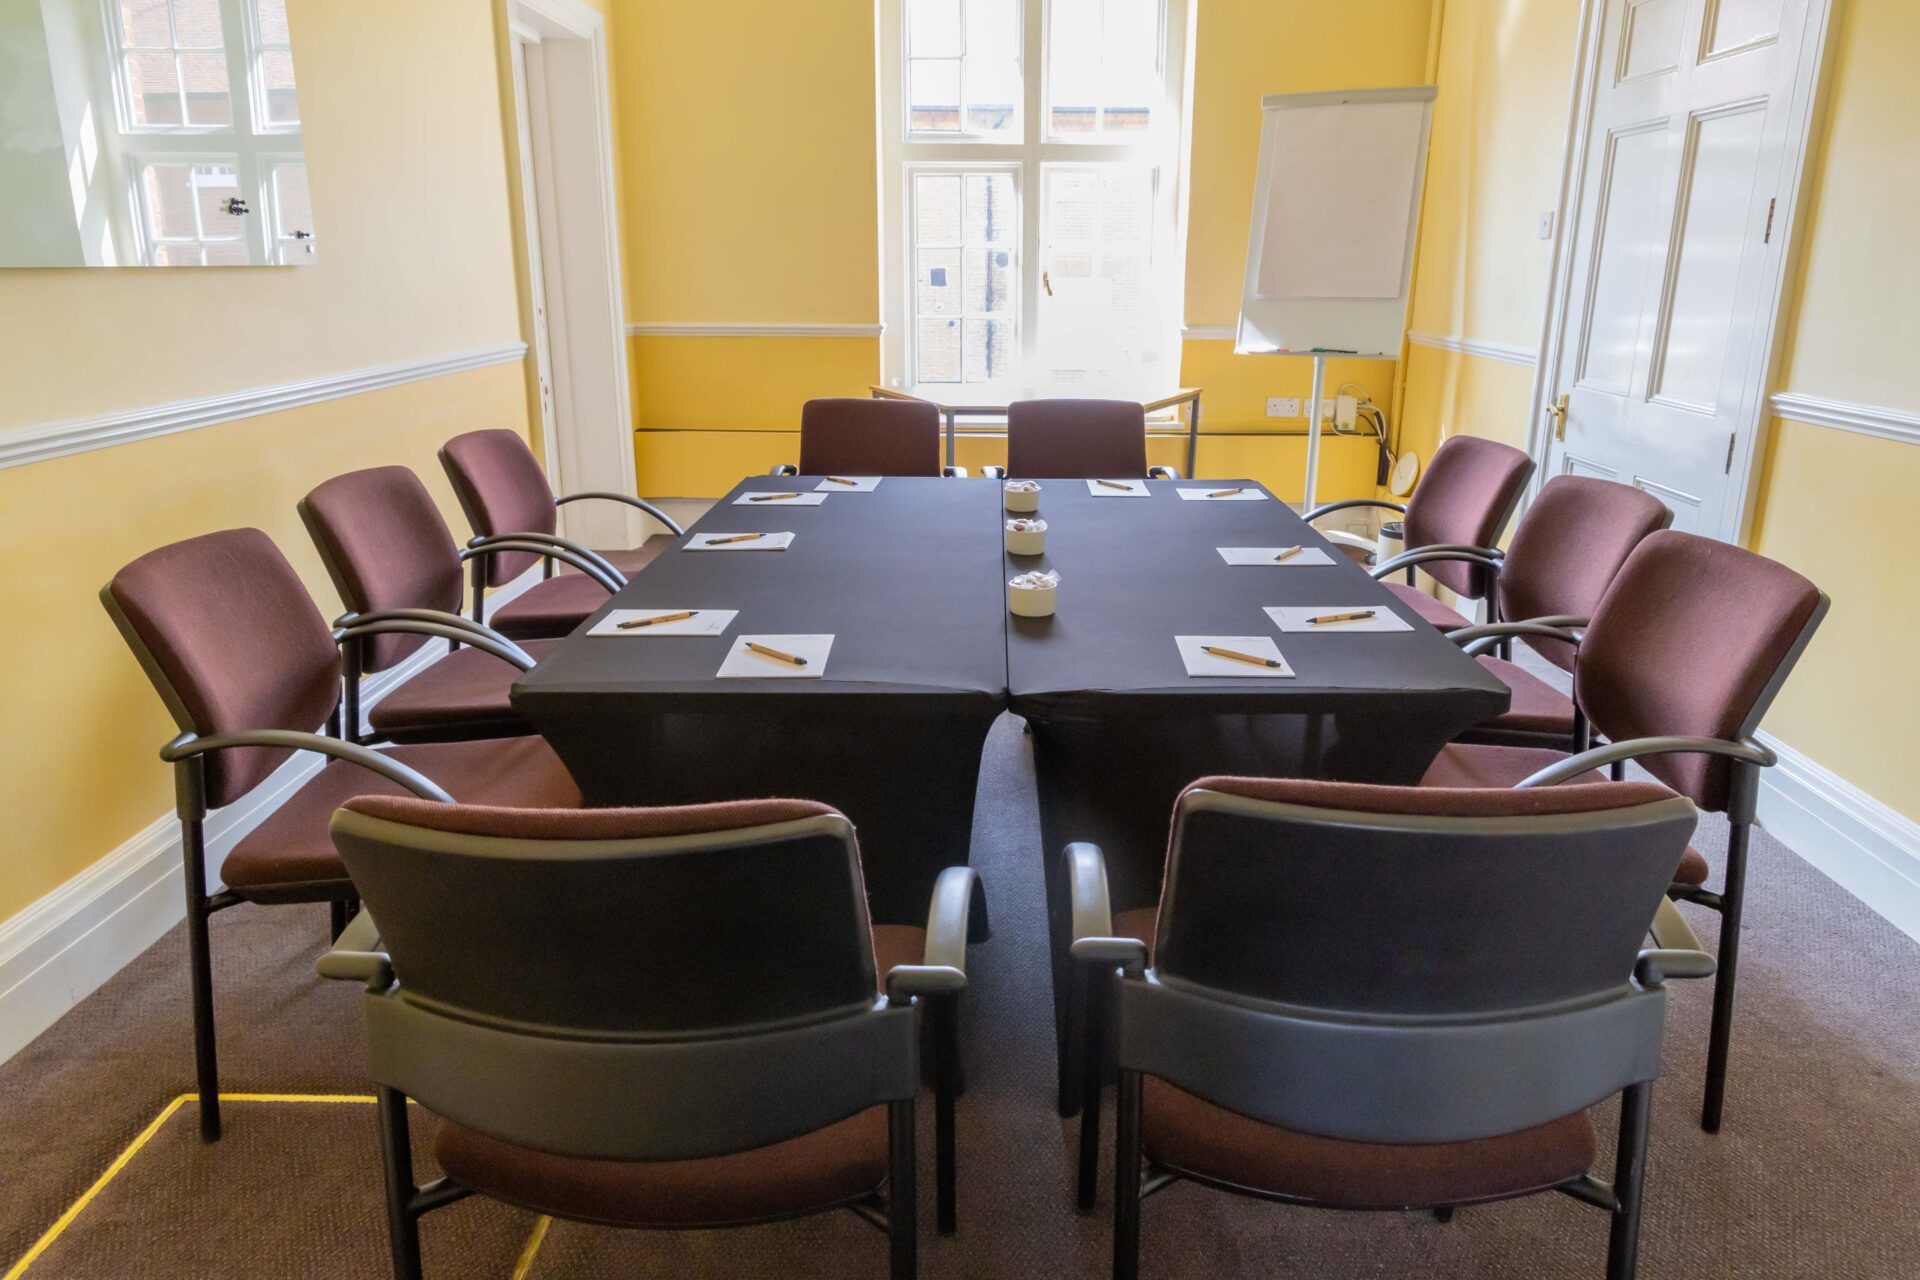 The Windham breakout room, laid out to accommodate up to ten people.